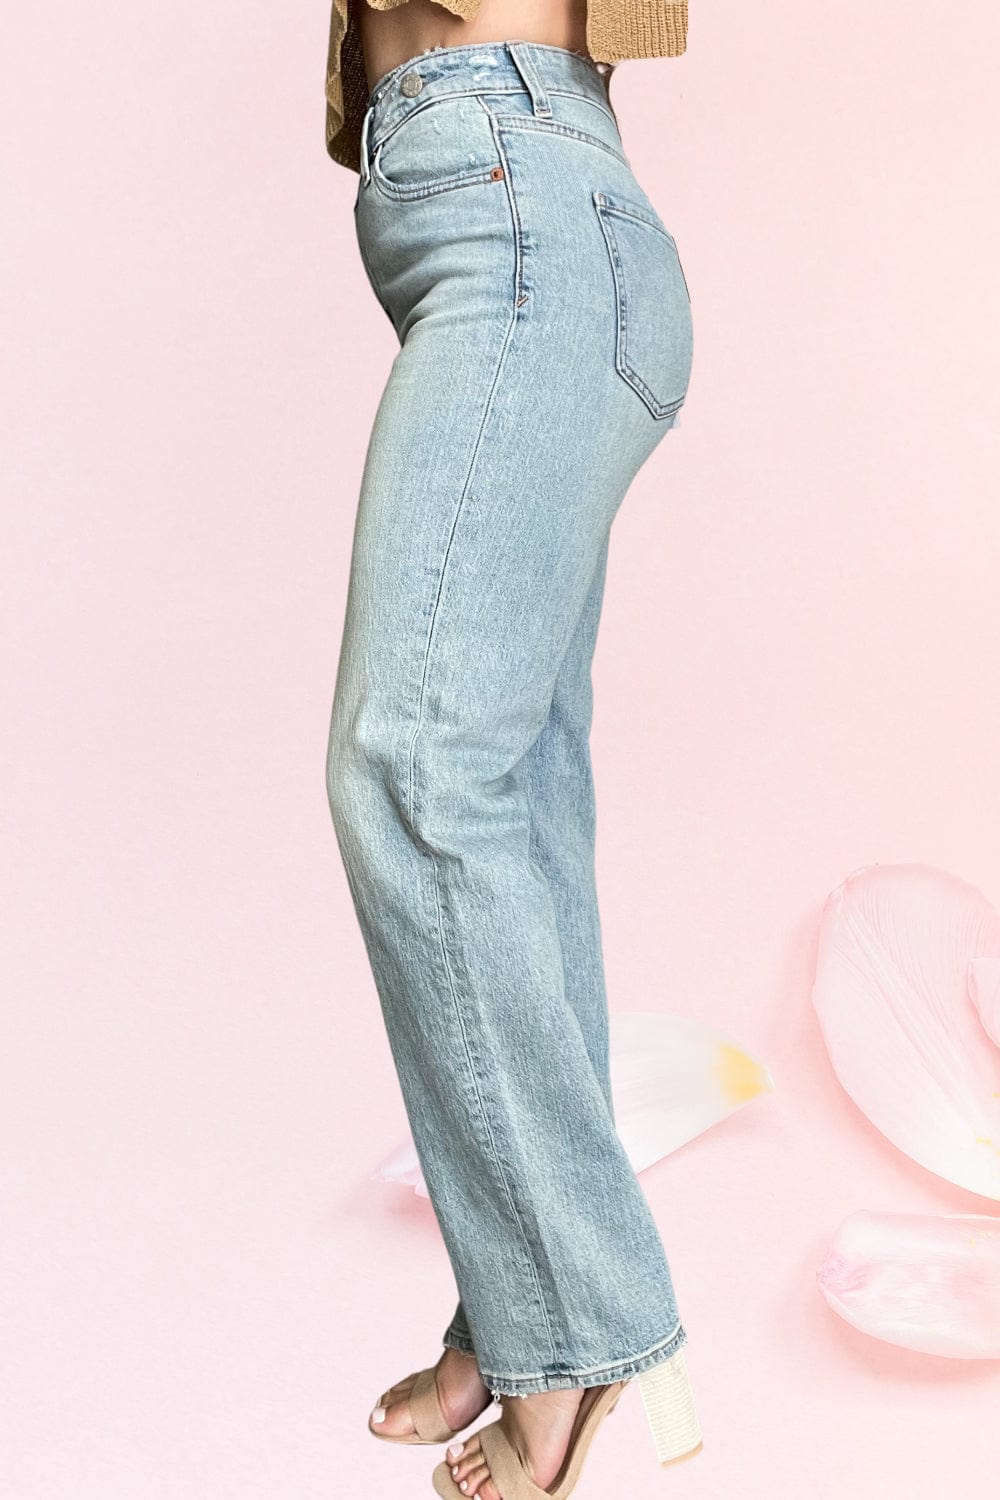 Sundaze High Rise Crossover Dad Jean in Bubble Bath - Pants - Blooming Daily